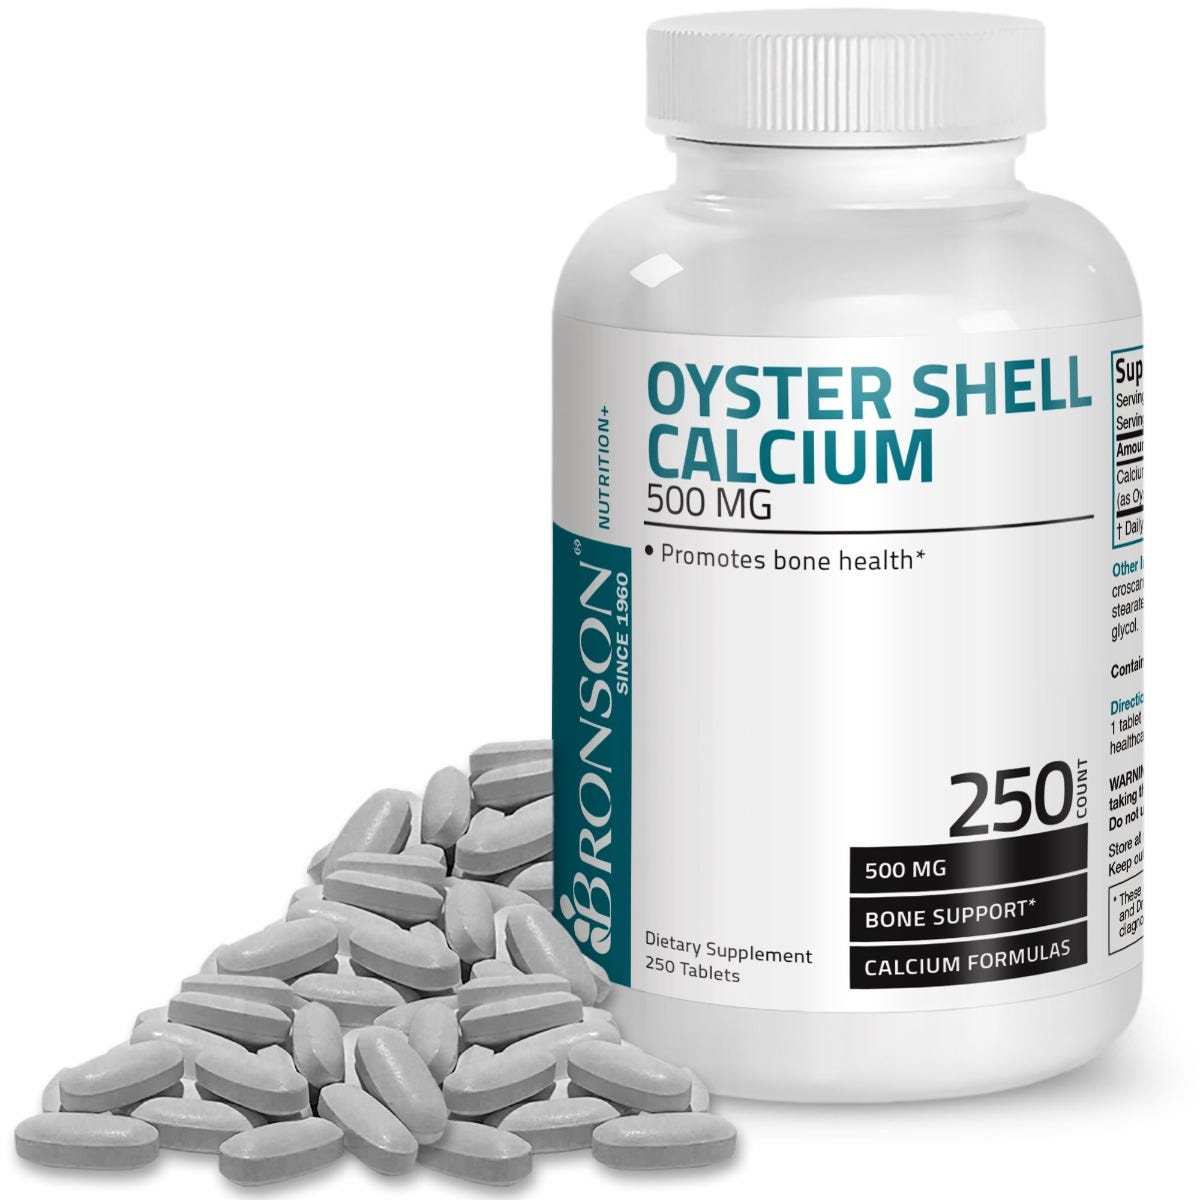 Bronson Vitamins Oyster Shell Calcium - 500 mg - 250 Tablets, Item #110B, Bottle, Front Label with Tablets